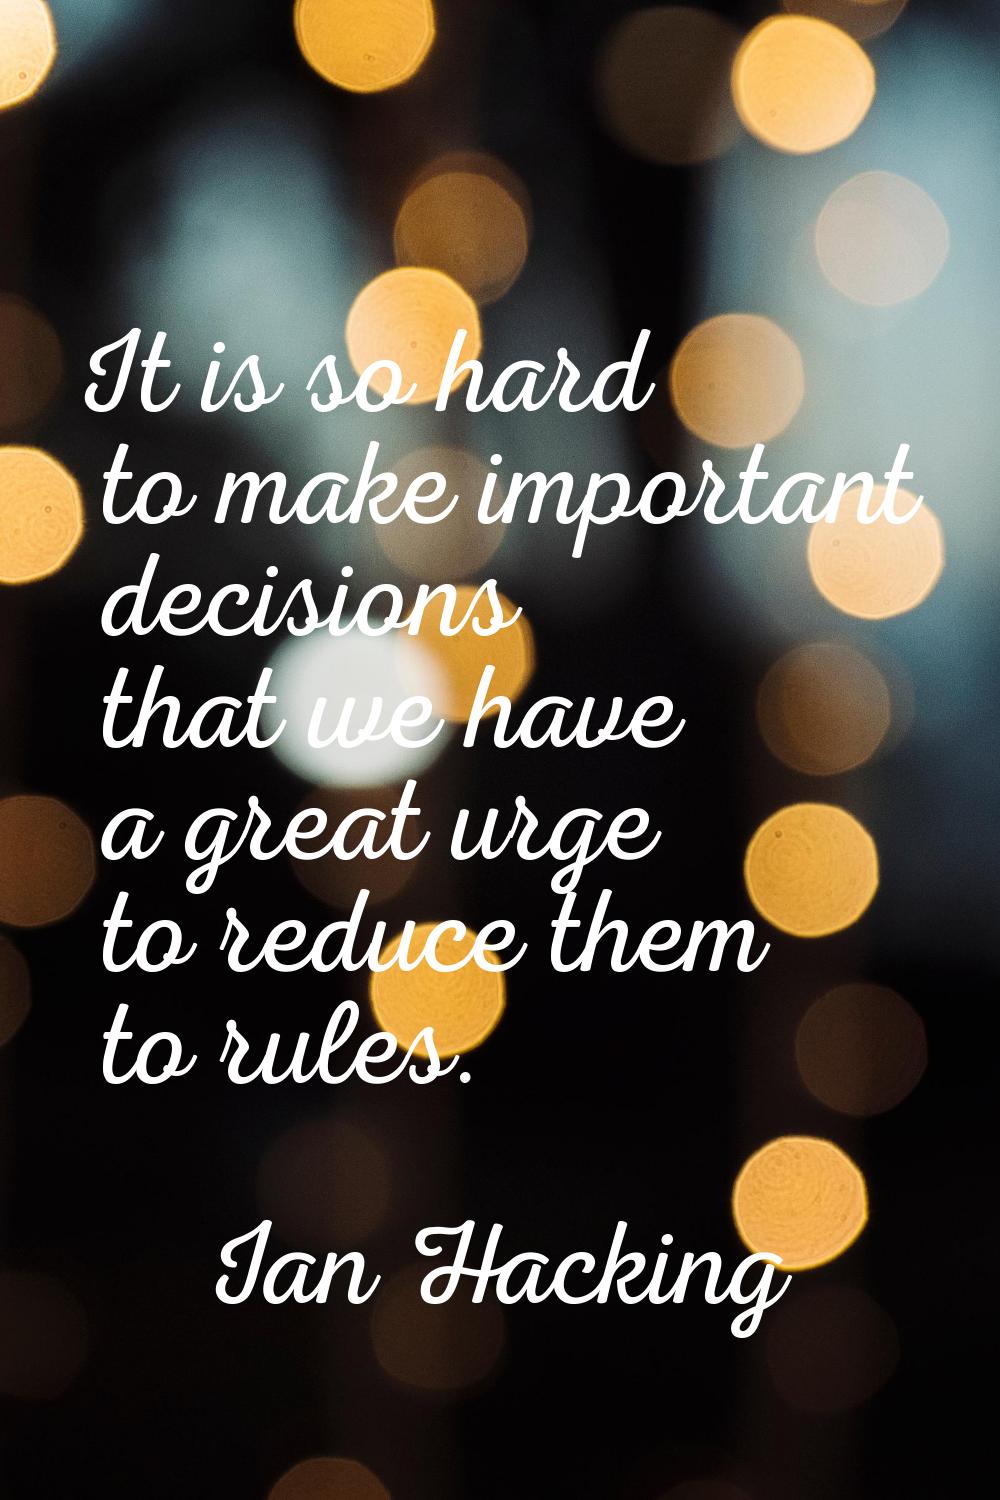 It is so hard to make important decisions that we have a great urge to reduce them to rules.